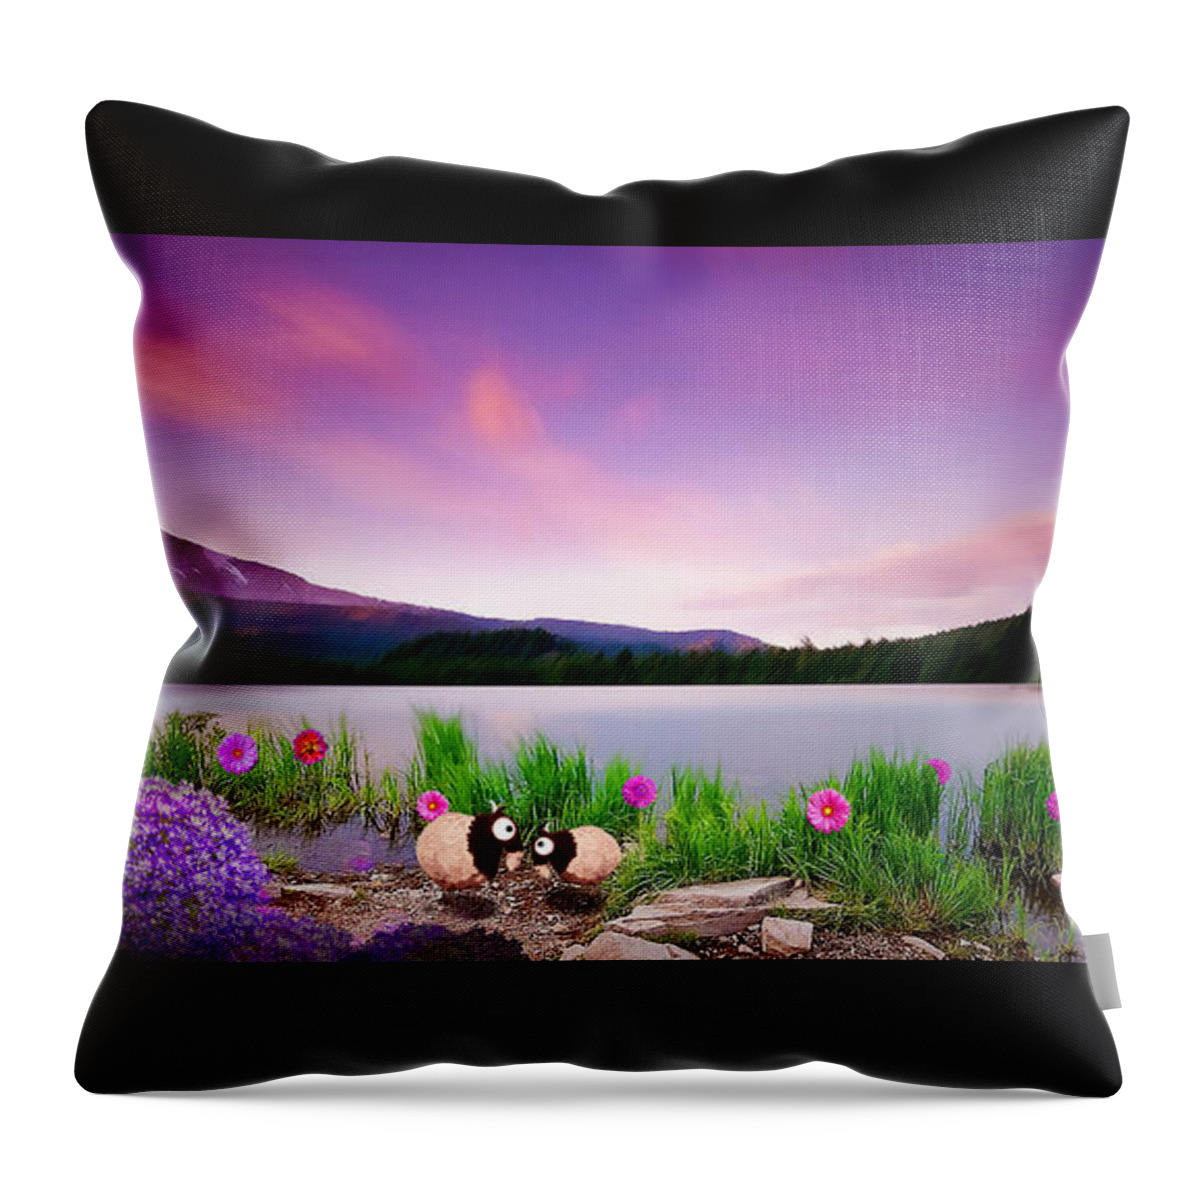 Landscape Throw Pillow featuring the painting First Light by Mindy Huntress